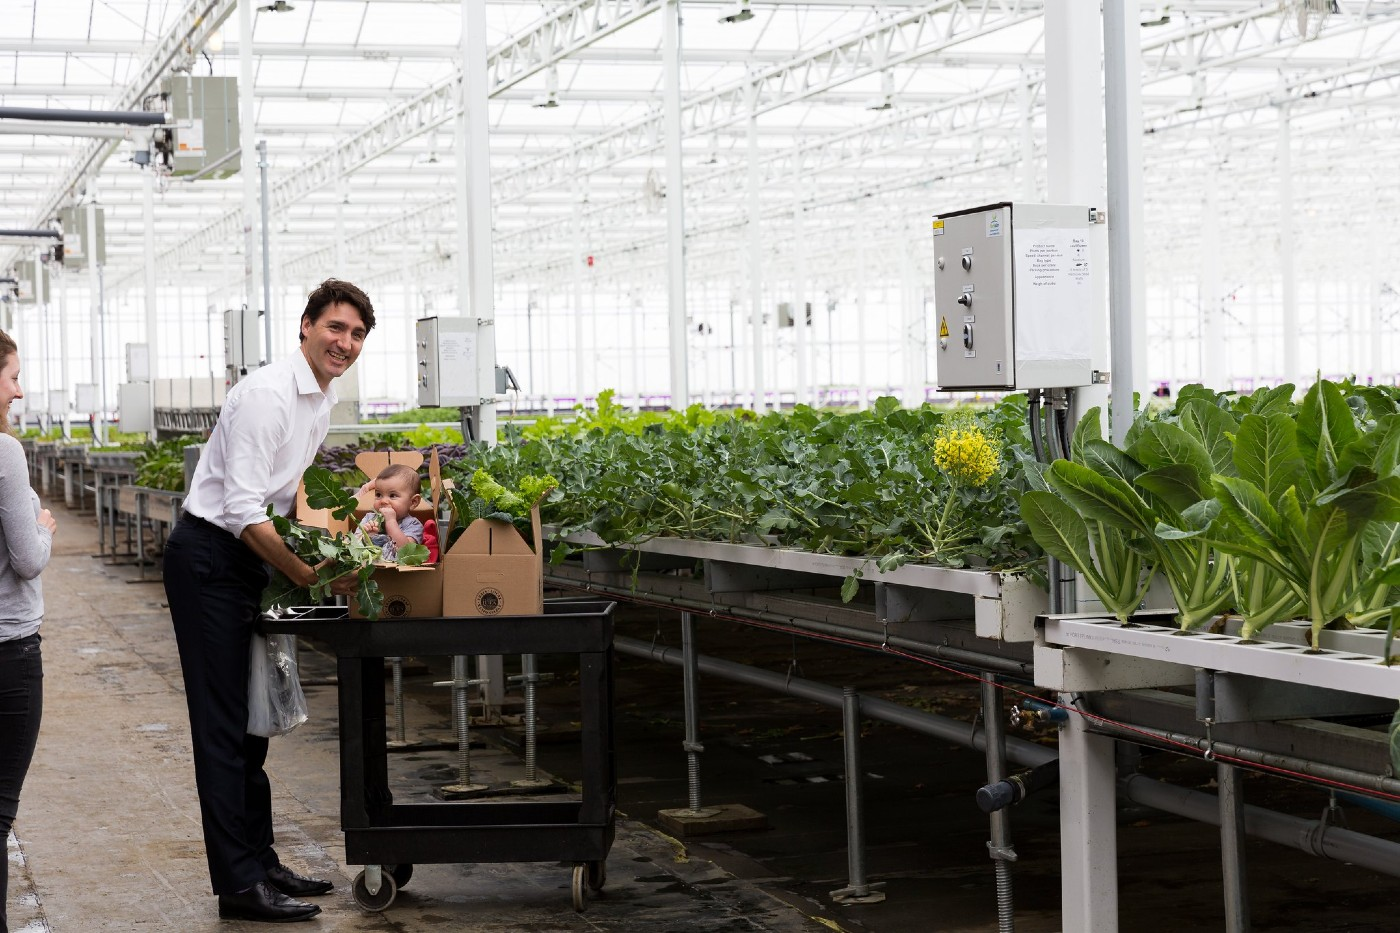 World's Biggest Rooftop Greenhouse in Montreal is as Big as 3 Football Fields – Now Can Feed 2% of the City